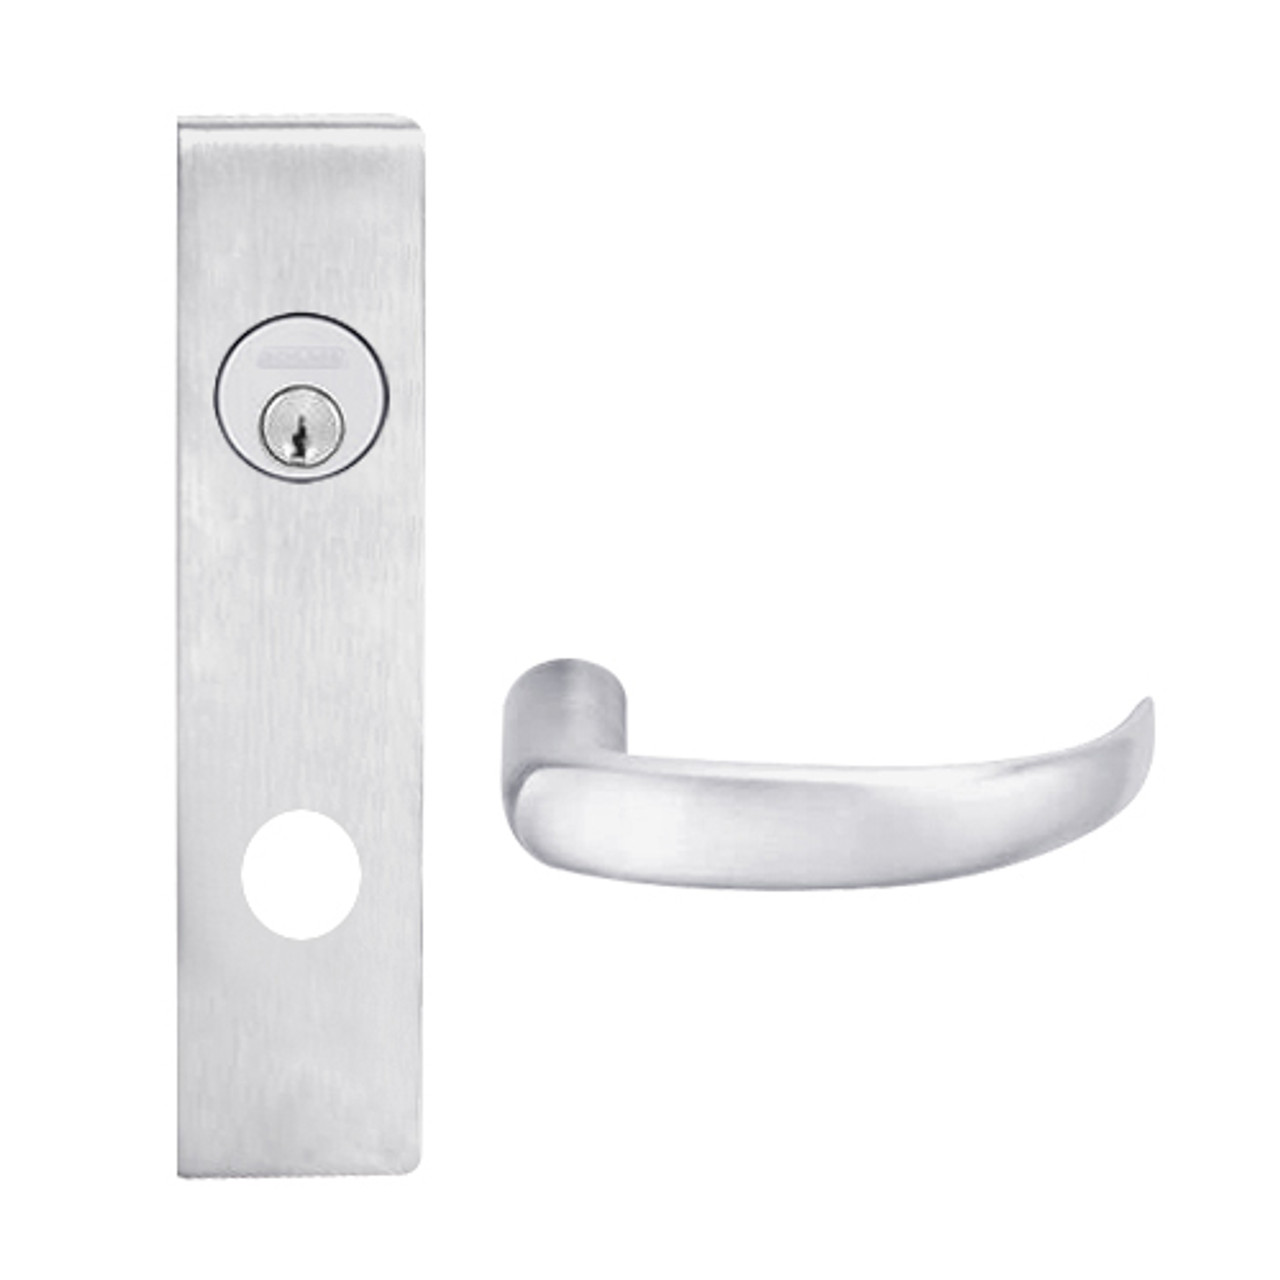 L9453L-17L-626 Schlage L Series Less Cylinder Entrance with Deadbolt Commercial Mortise Lock with 17 Cast Lever Design in Satin Chrome